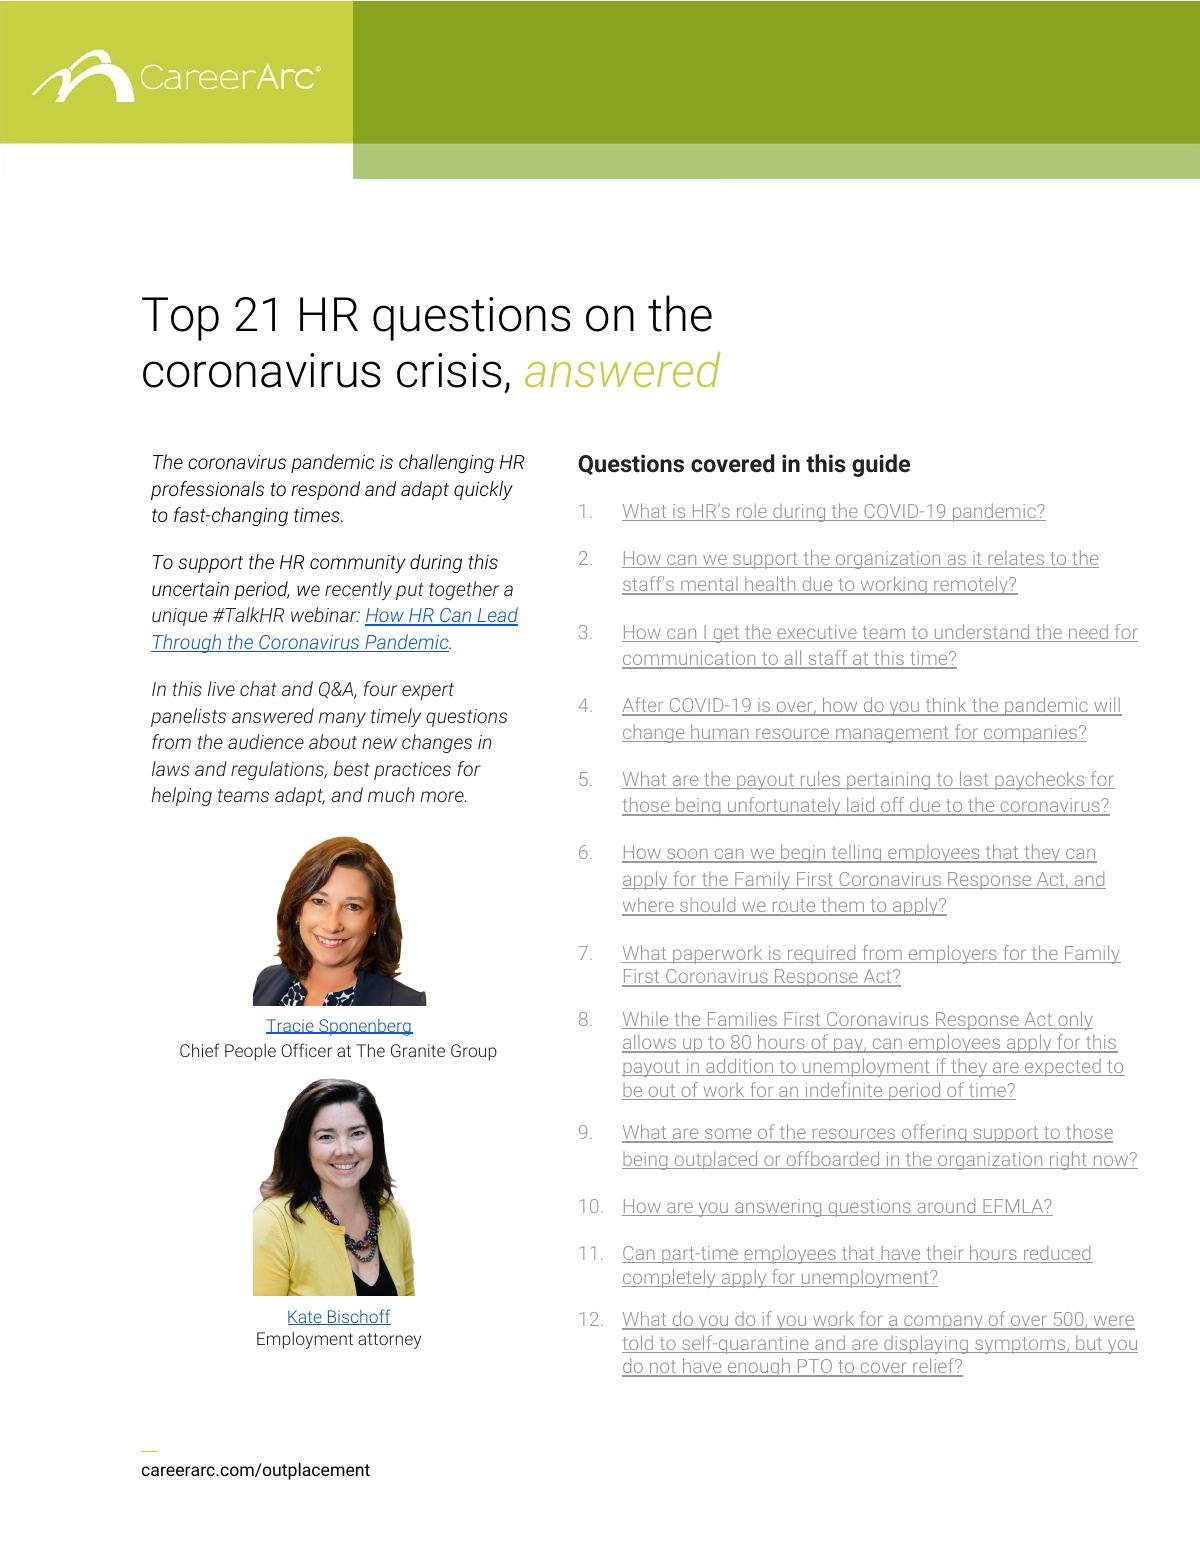 Top 21 HR Questions on the Coronavirus Crisis, ​Answered